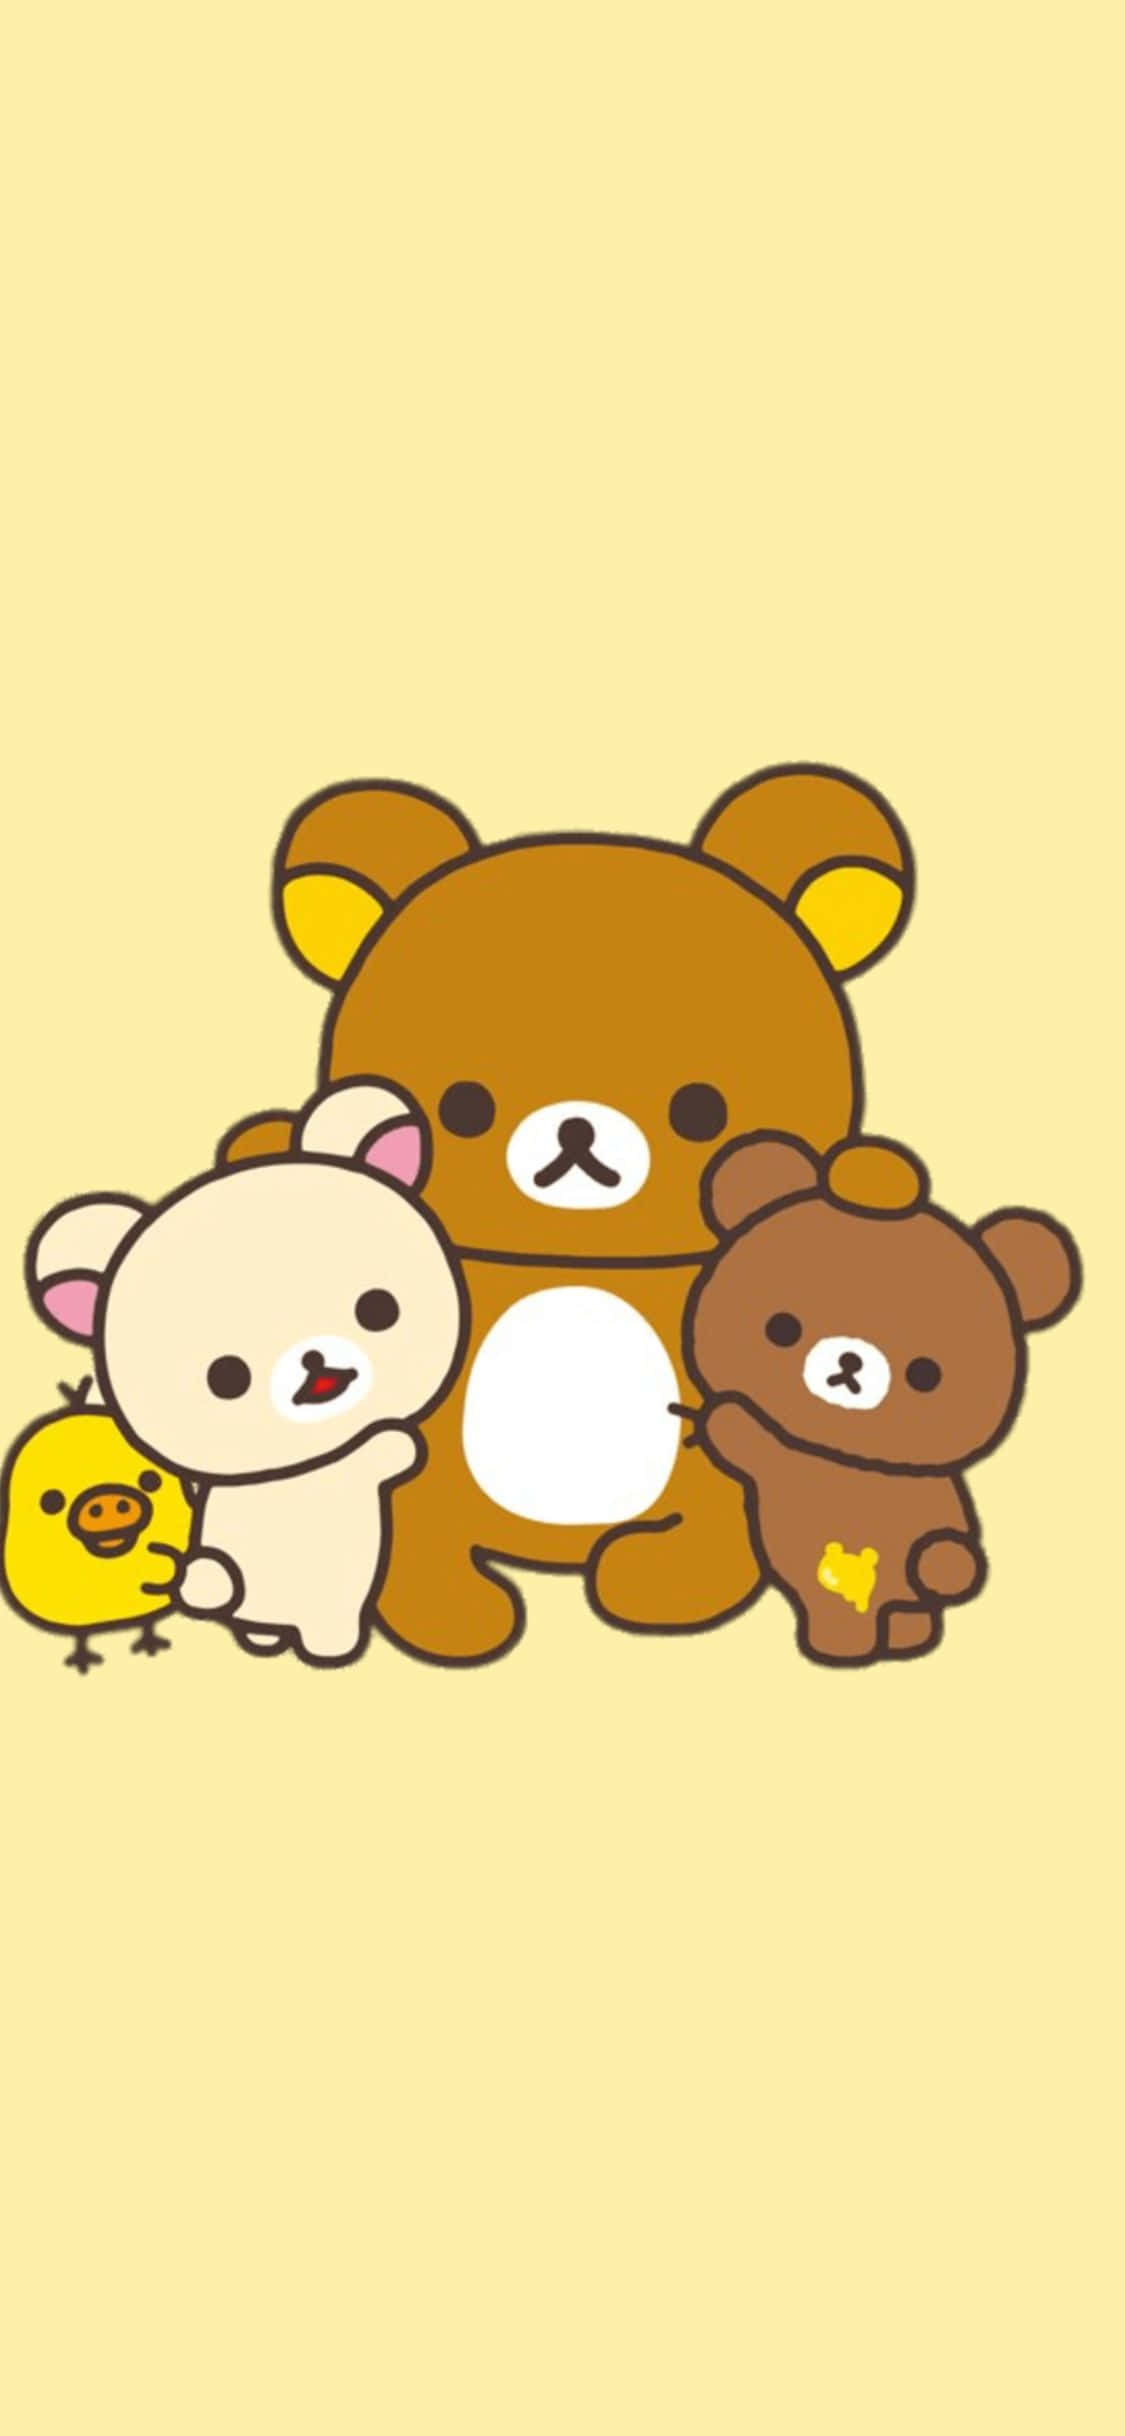 Adorable Rilakkuma background for your mobile device